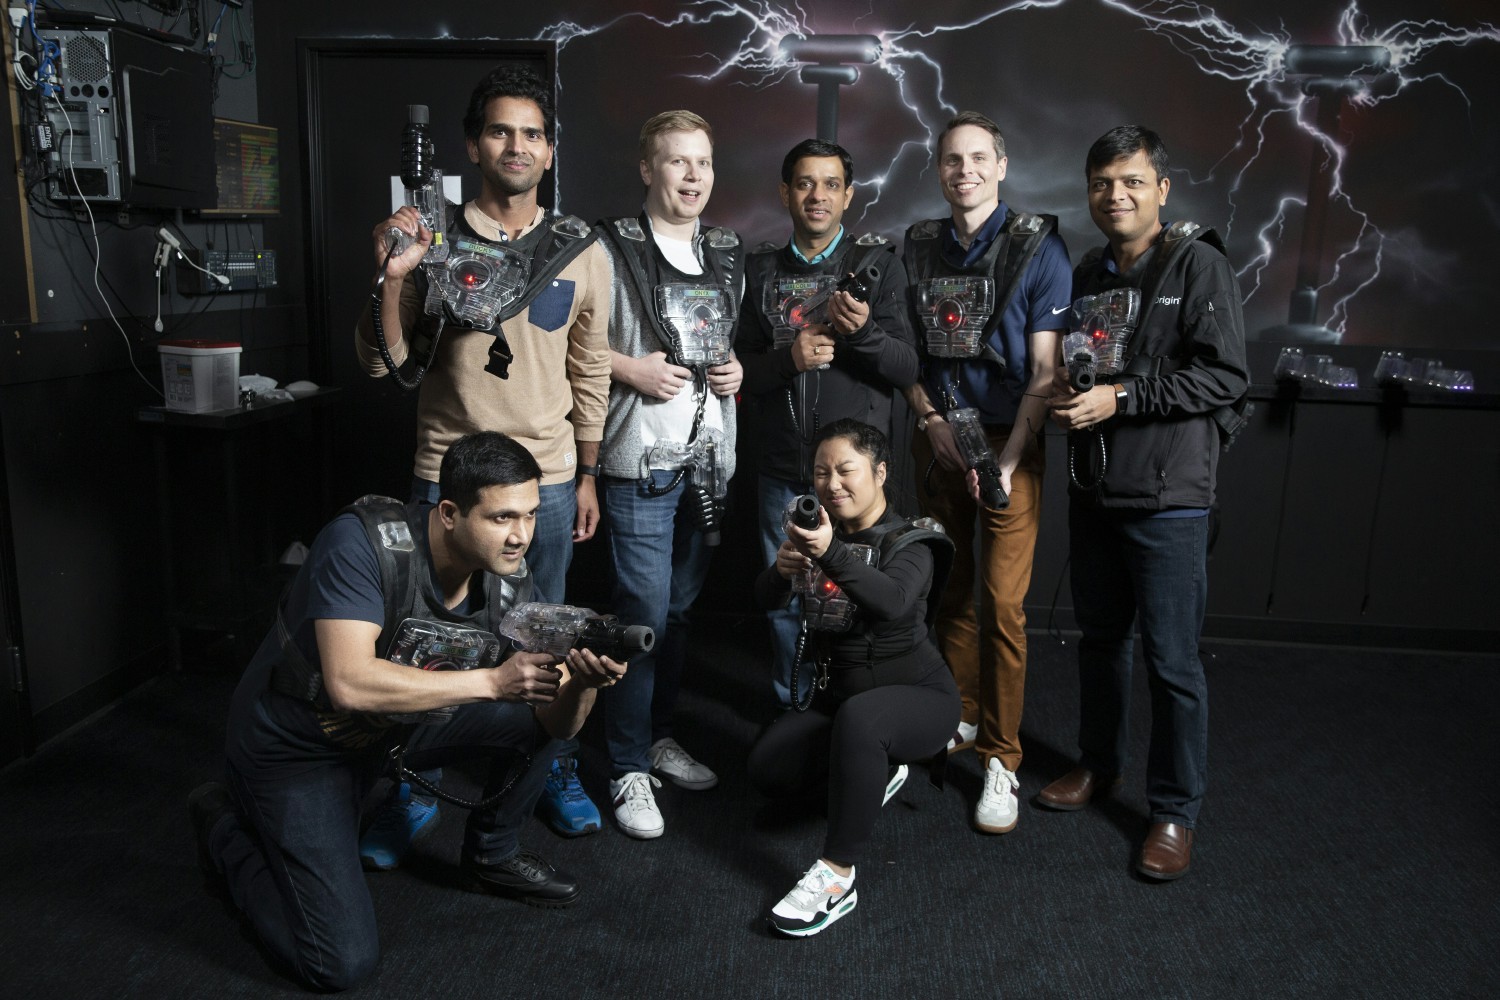 Laser Tag winners during a day of fun with the whole Origin-USA team.